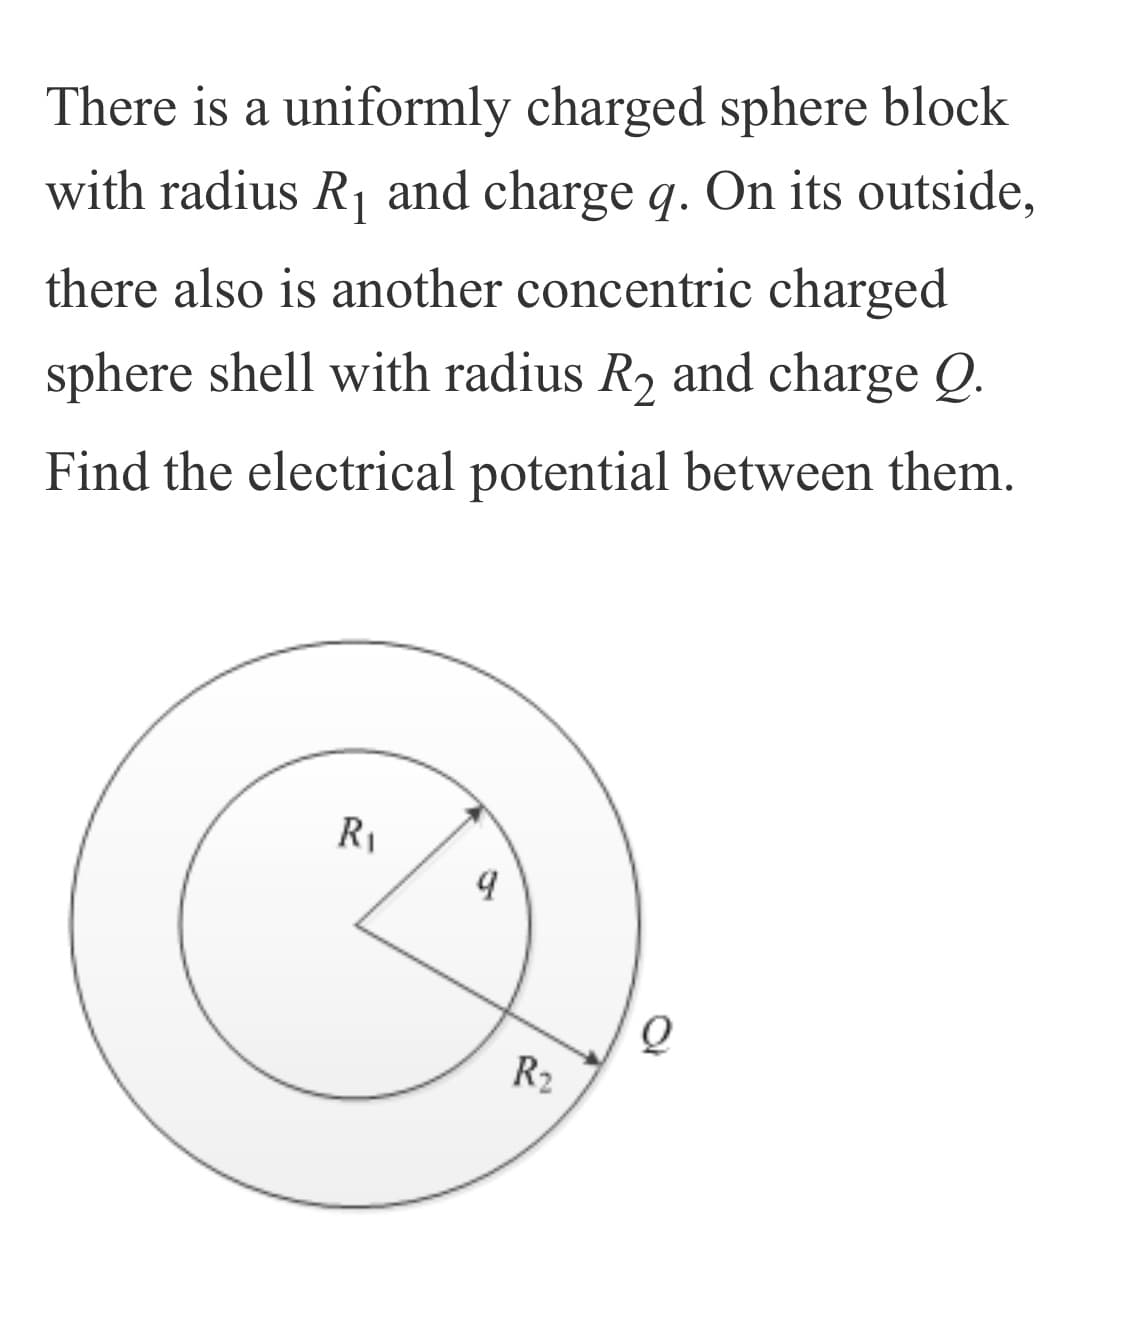 There is a uniformly charged sphere block
with radius R₁ and charge q. On its outside,
there also is another concentric charged
sphere shell with radius R₂ and charge Q.
Find the electrical potential between them.
R₁
9
R₂